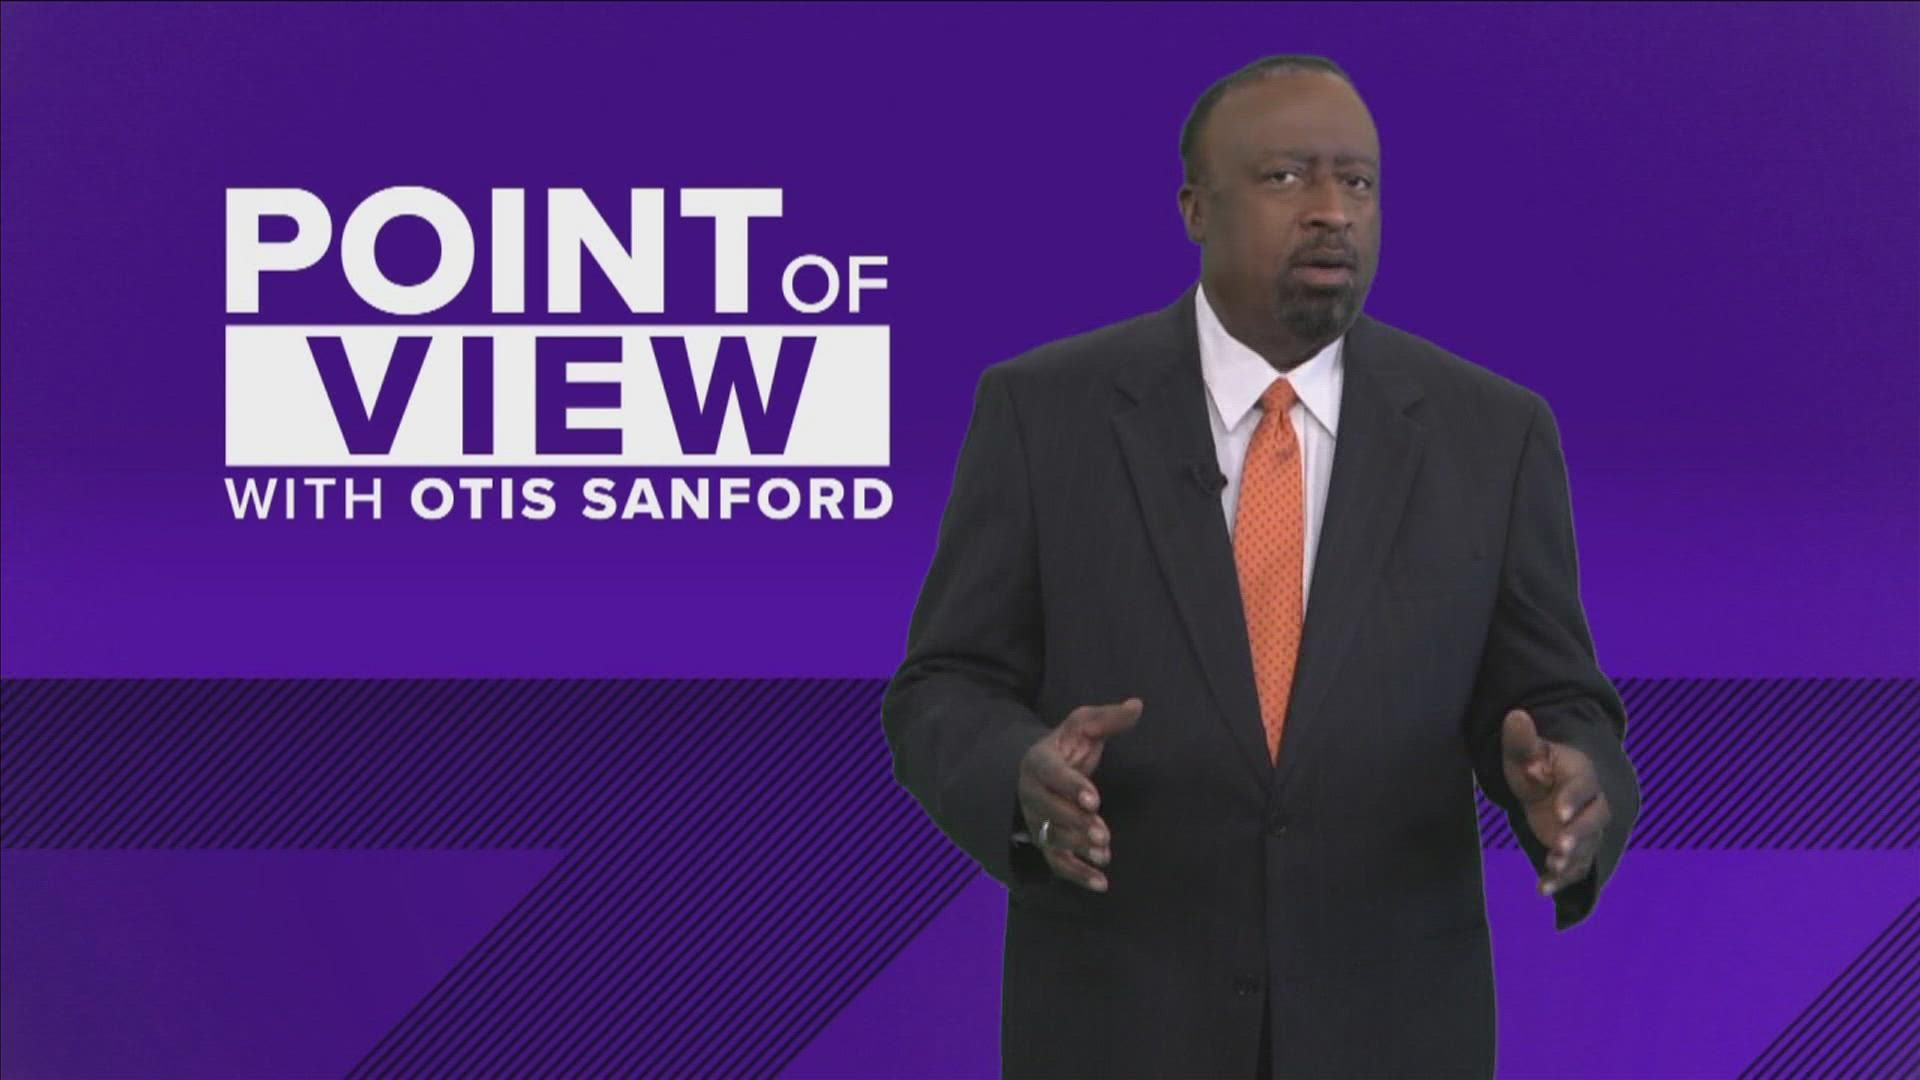 ABC24 political analyst and commentator Otis Sanford shared his point of view on the latest excuses from the Shelby County Clerk Wanda Halbert.